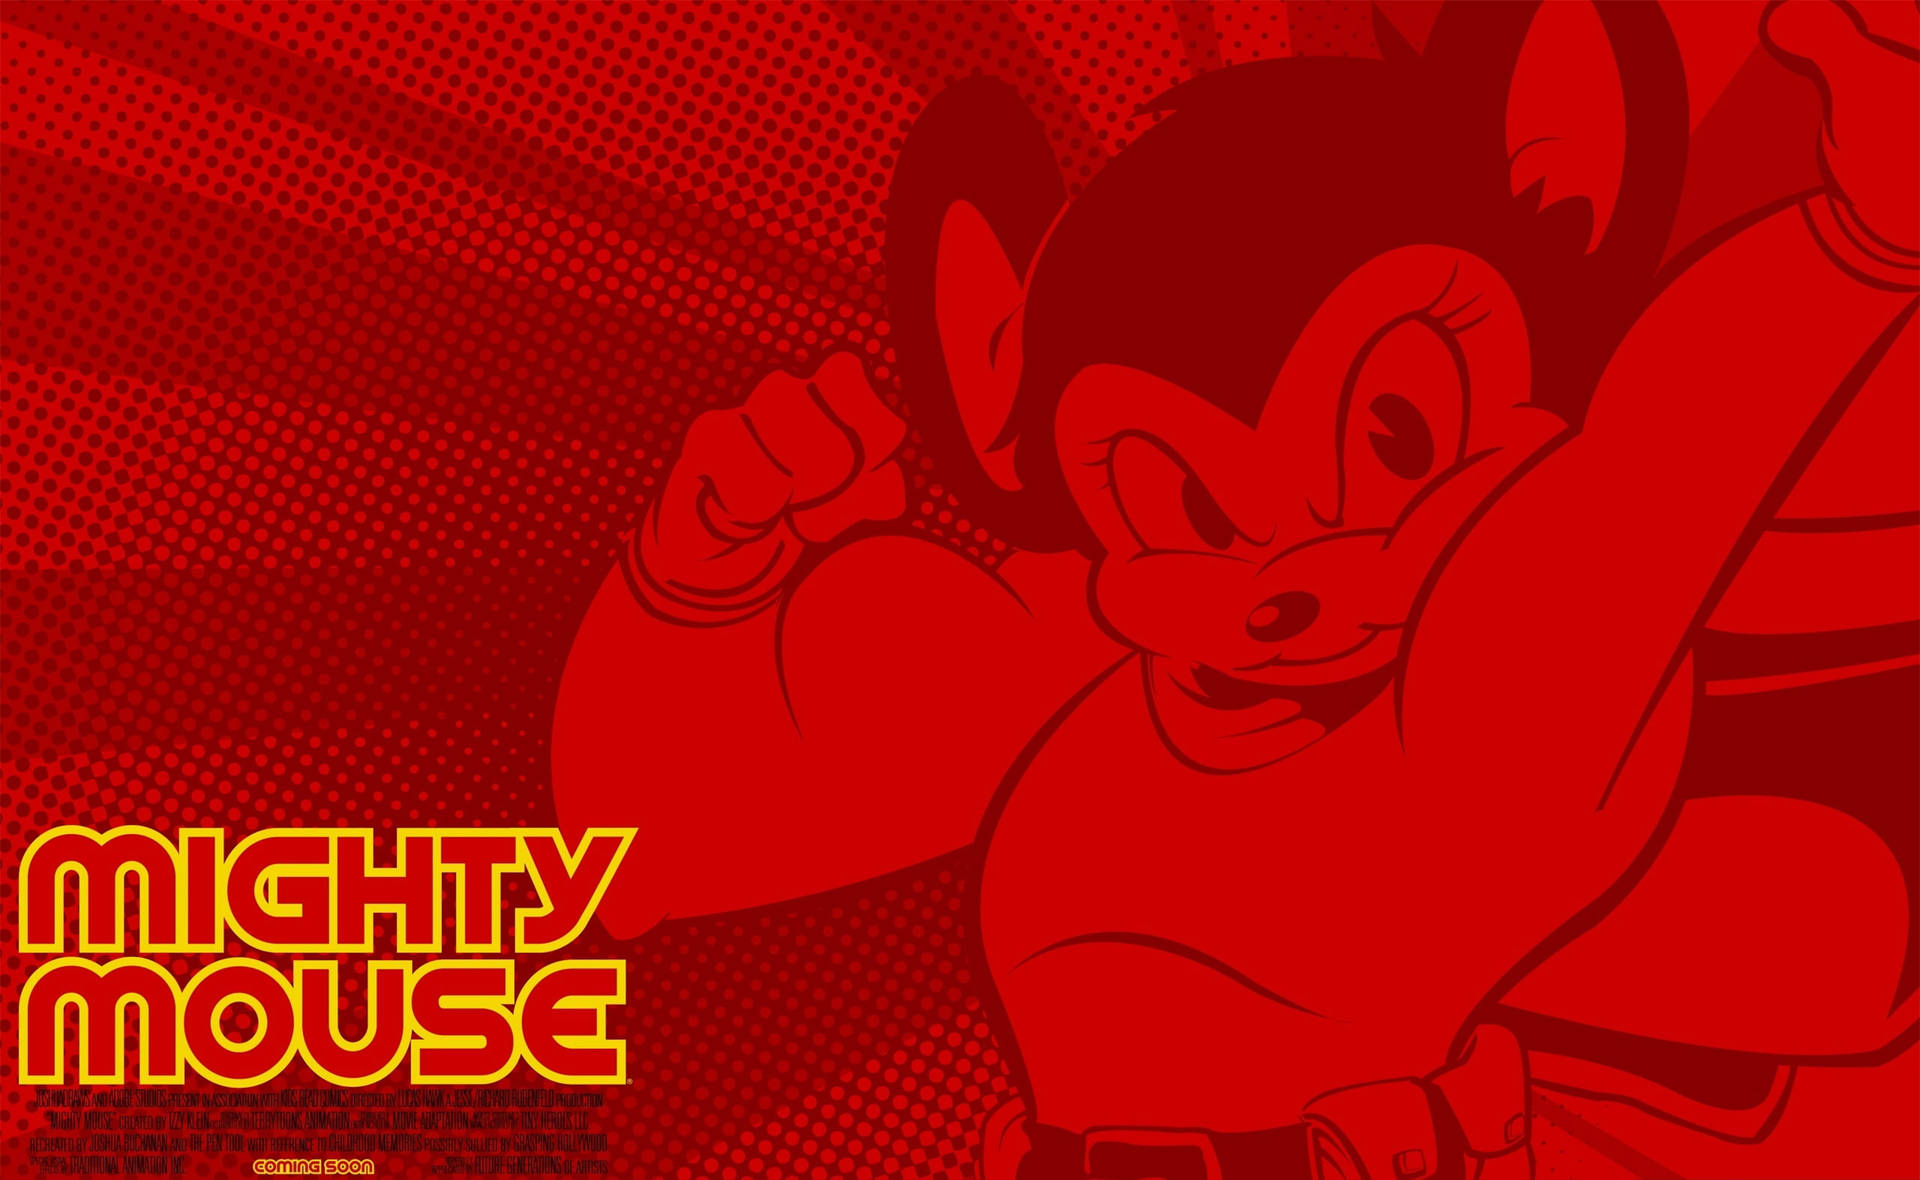 Mighty Mouse Red Poster Background